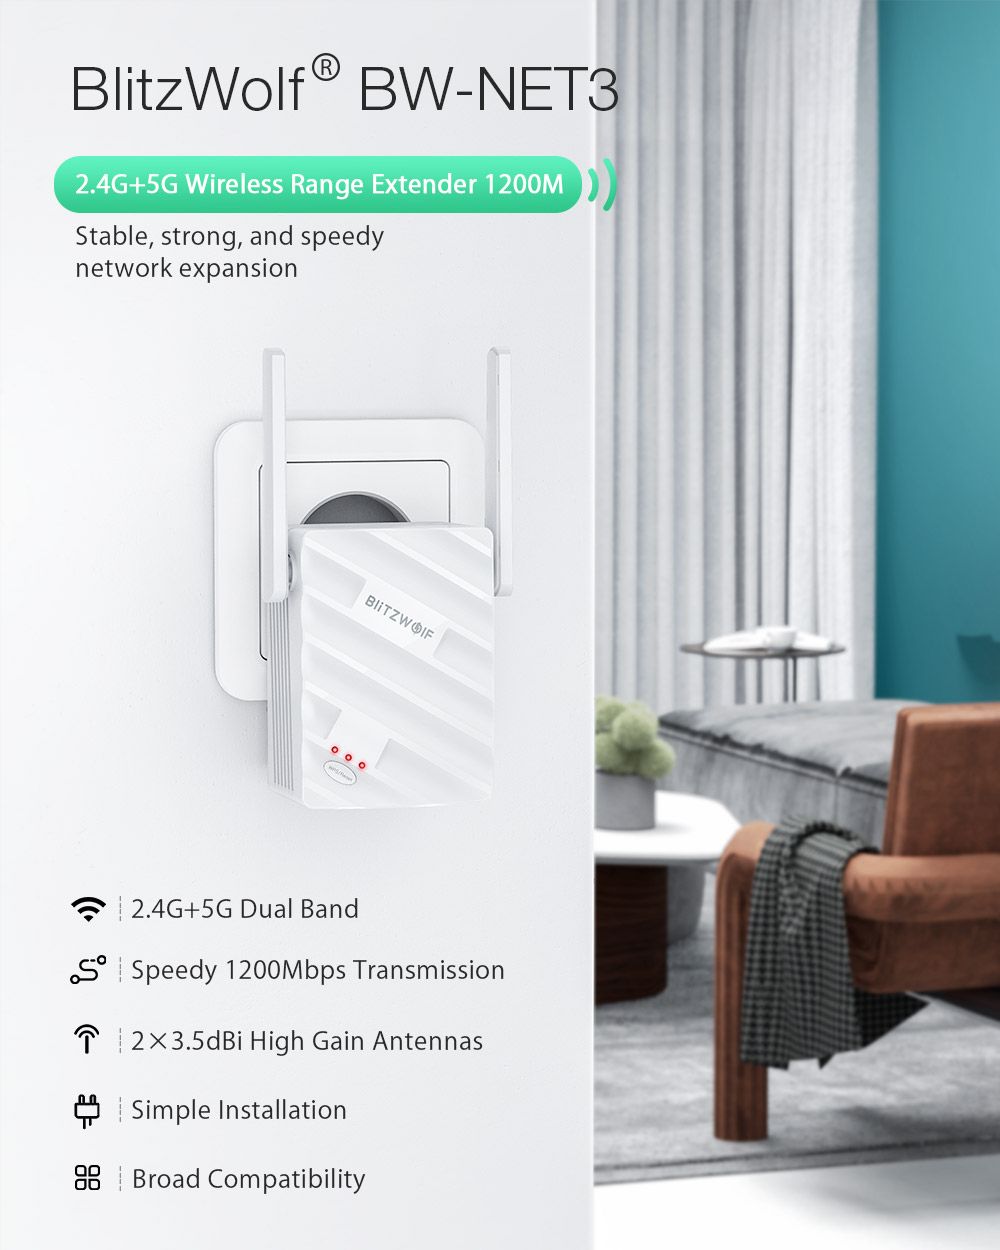 BlitzWolfreg-BW-NET3-Wireless-Repeater-Dual-Band-1200Mbps-Wireless-Range-Extender-Supports-64-Device-1707054